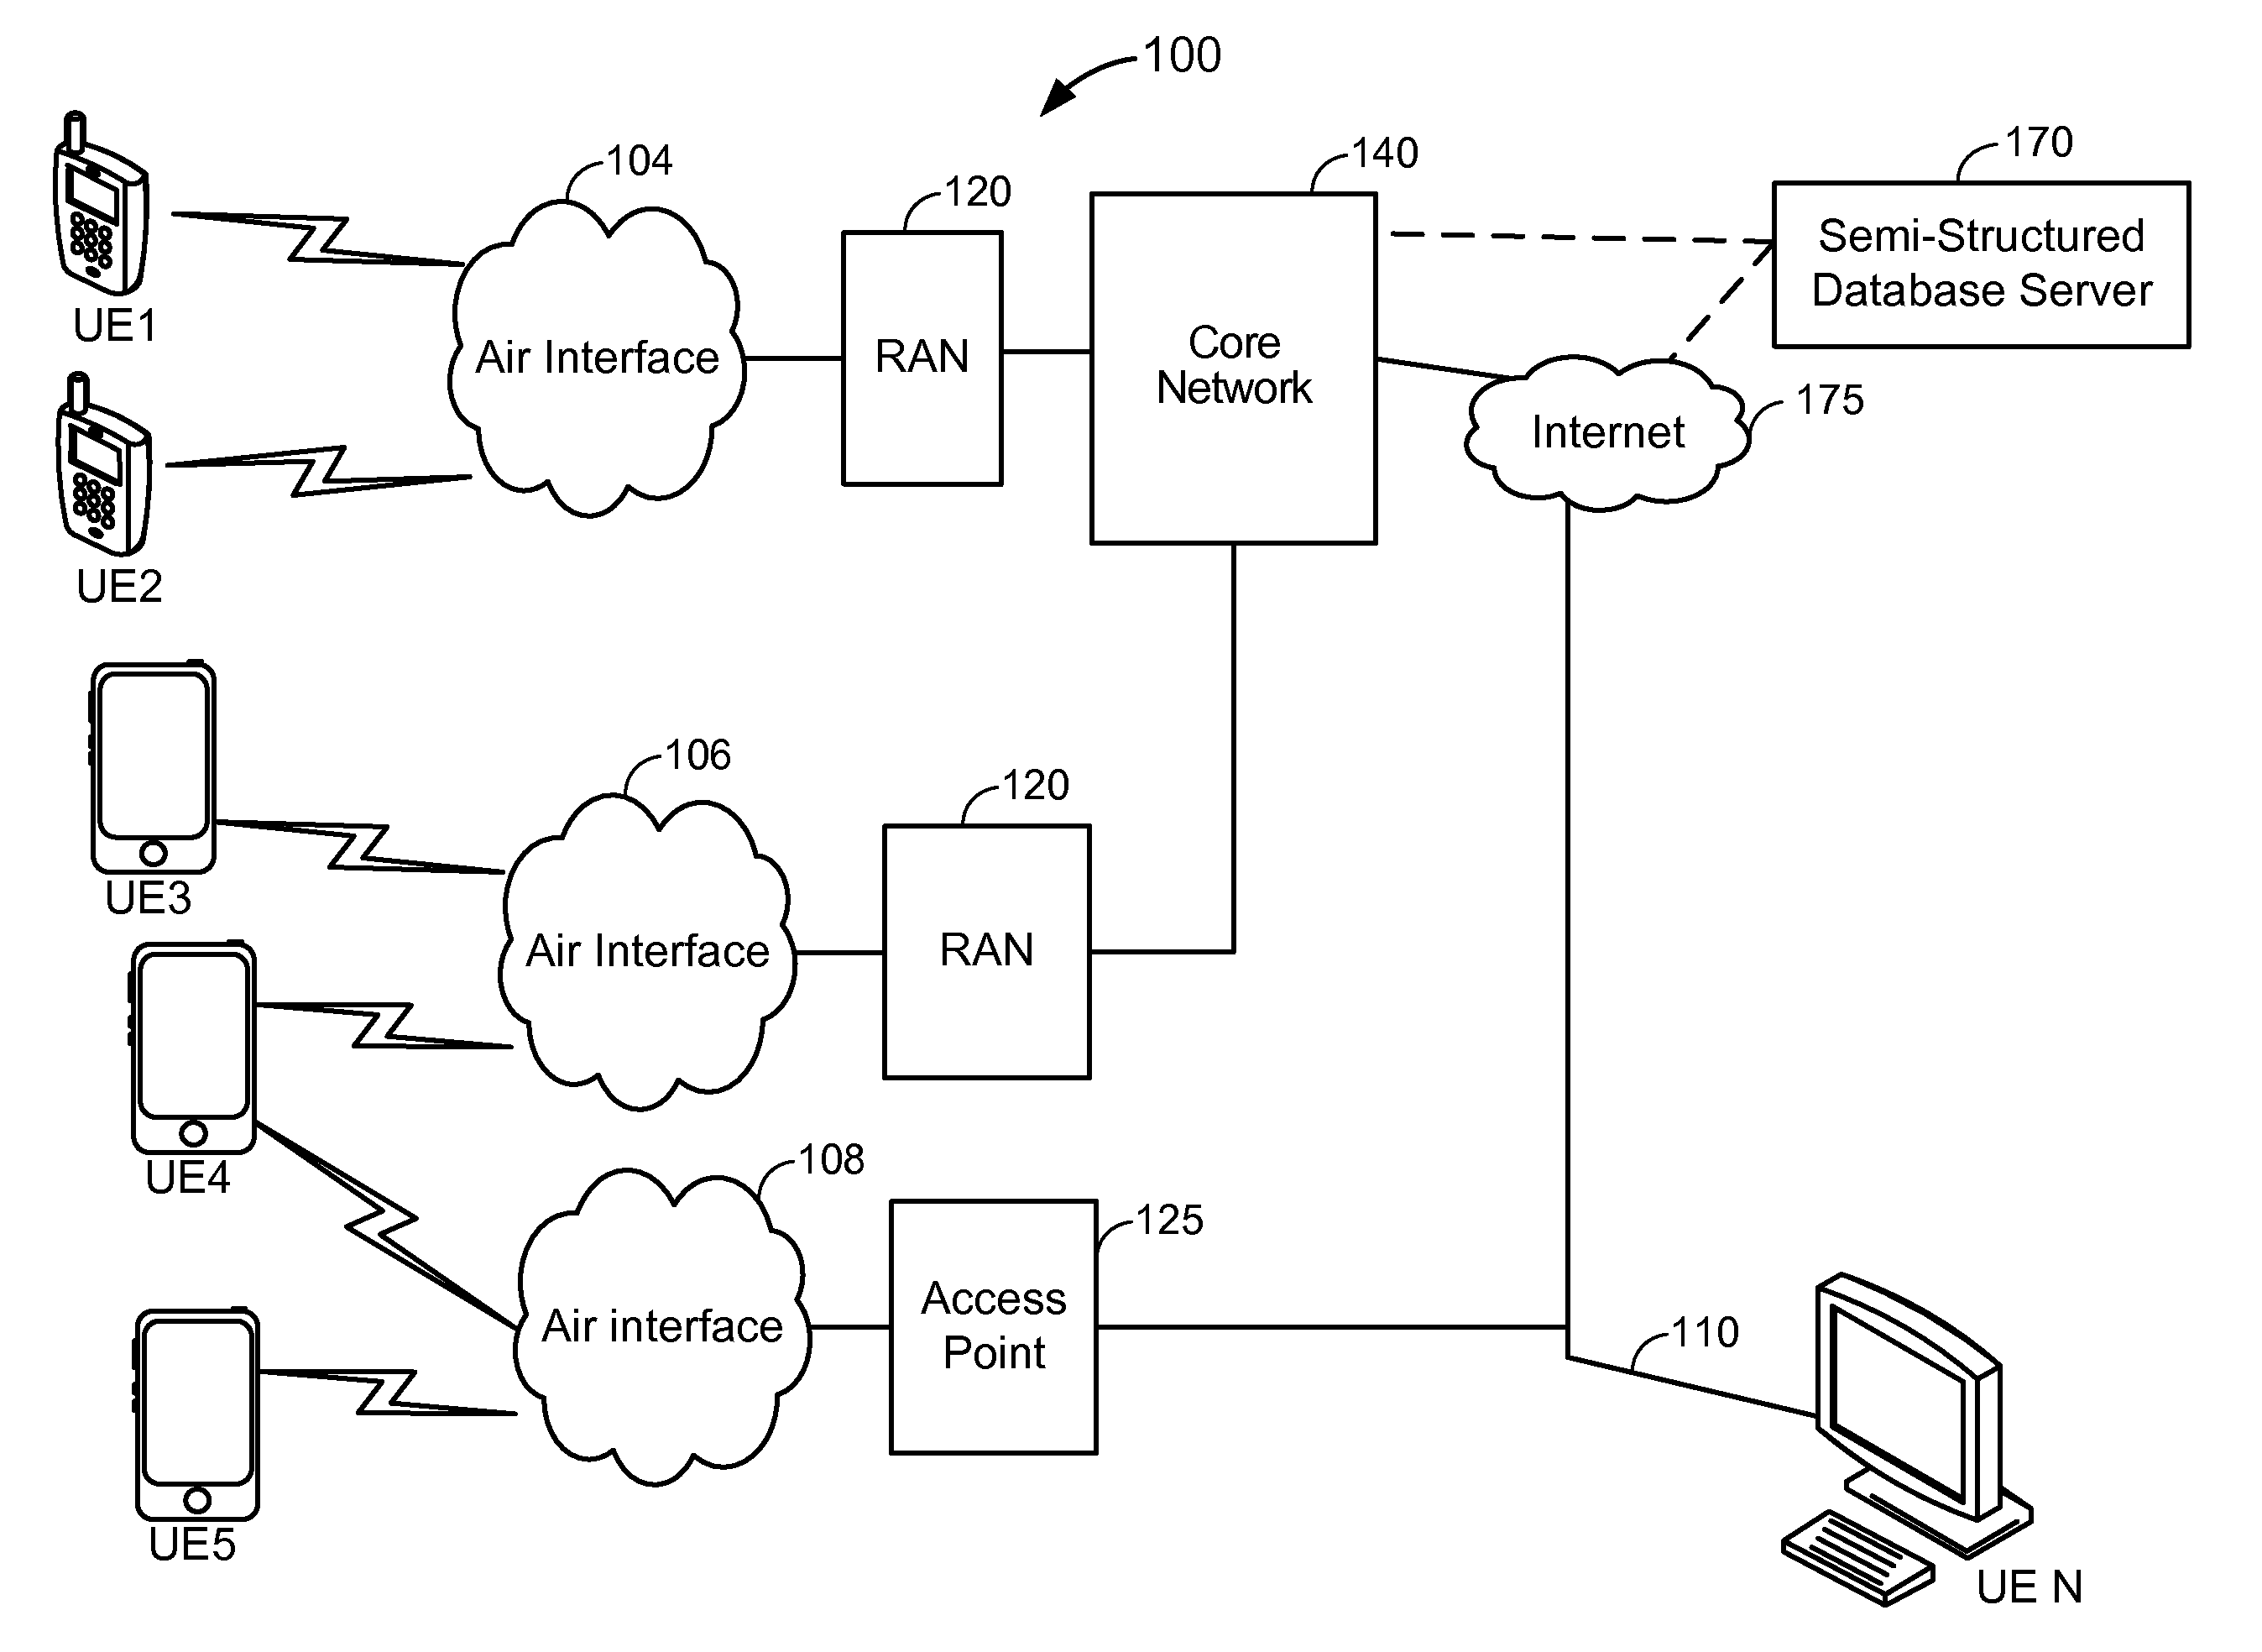 Executing a faceted search within a semi-structured database using a bloom filter